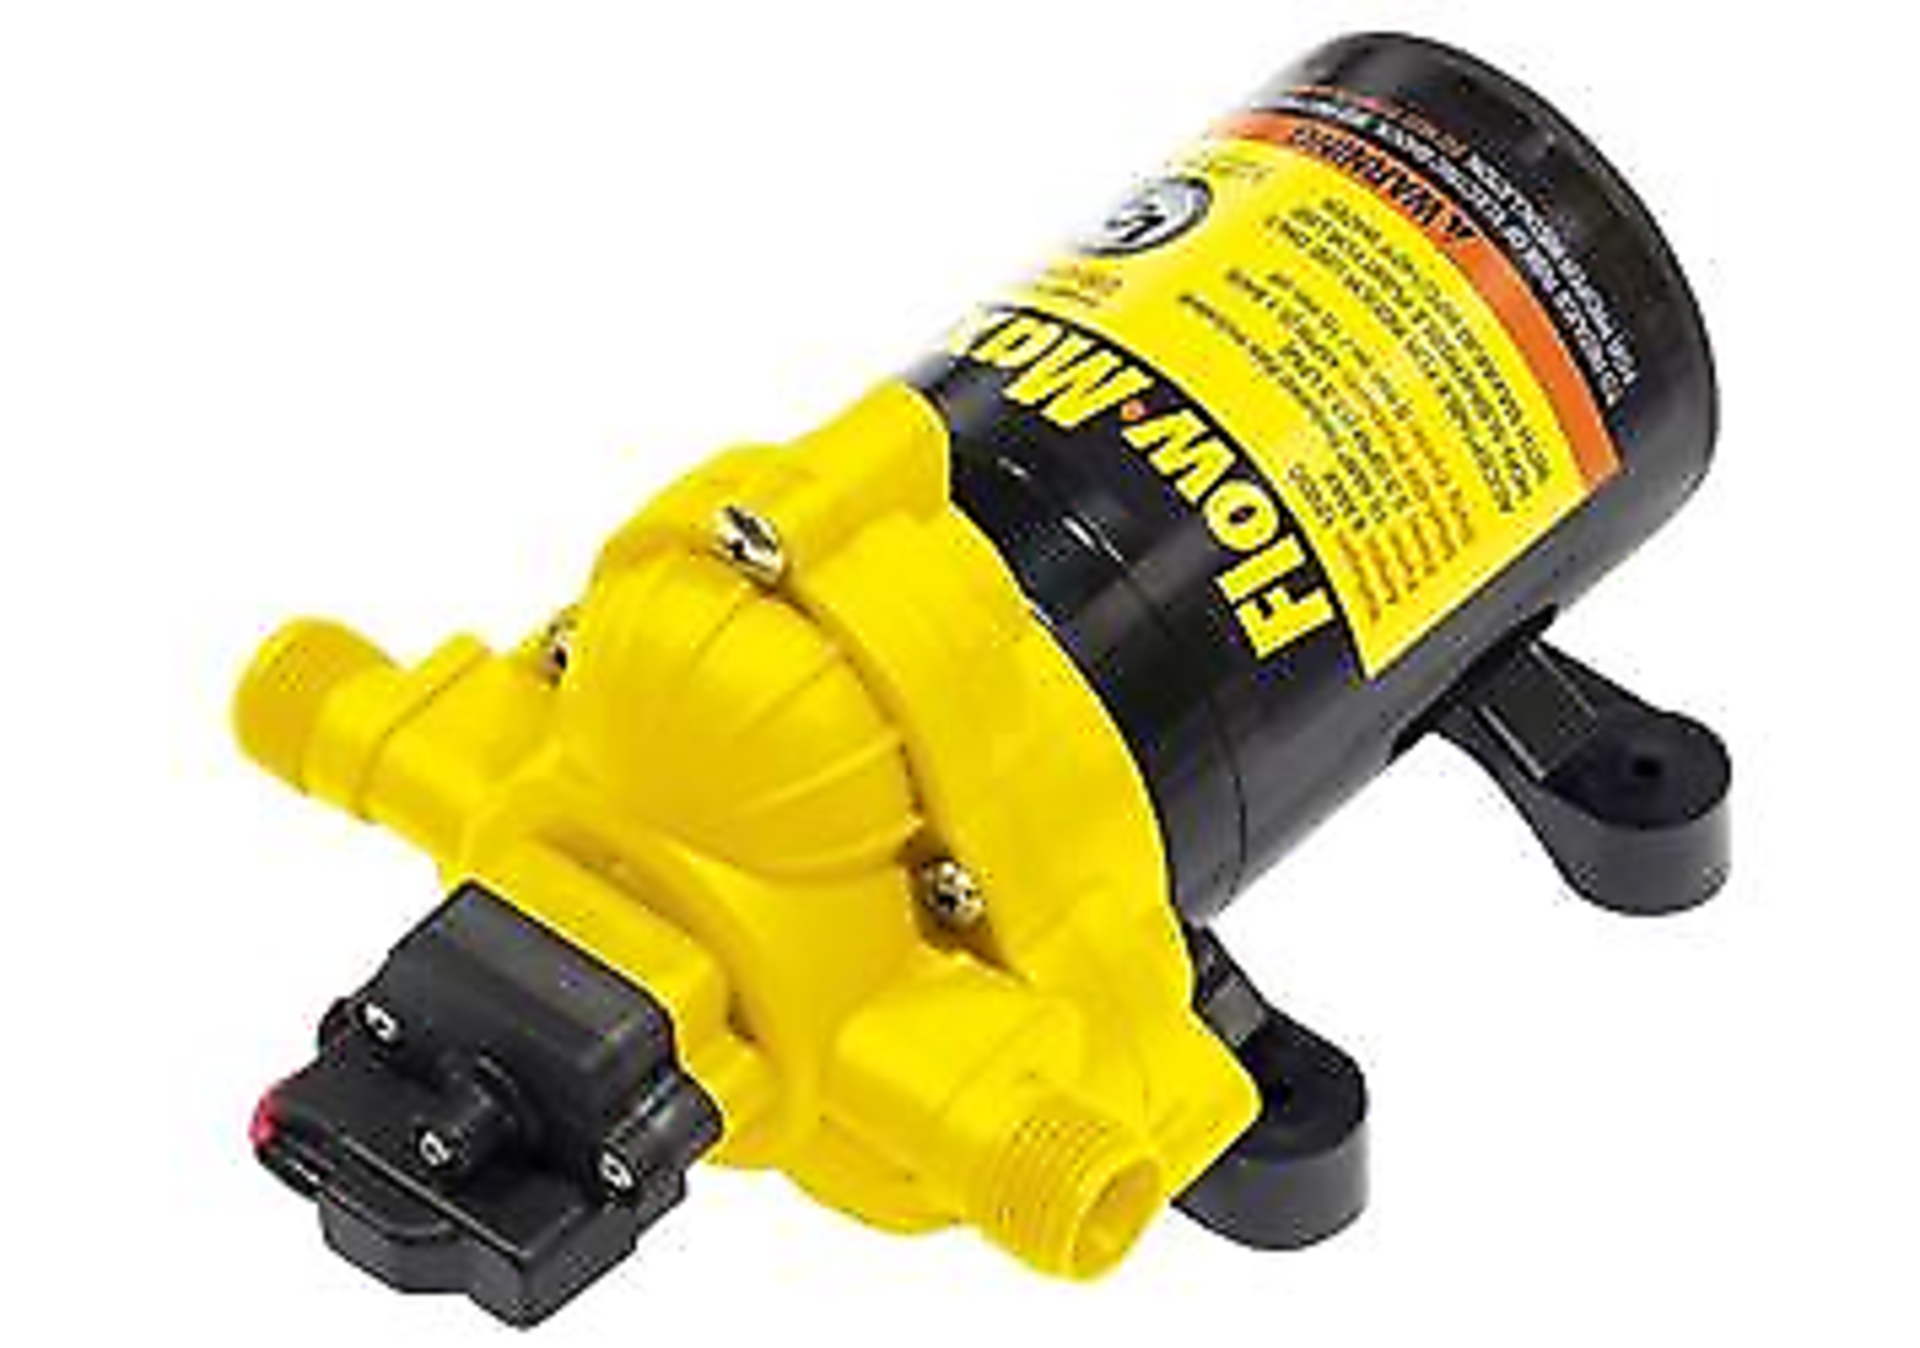 1 x Lippert Flow Max 12v Fresh Water Pump - 12v DC 3 GPM - New and Boxed - Suitable For